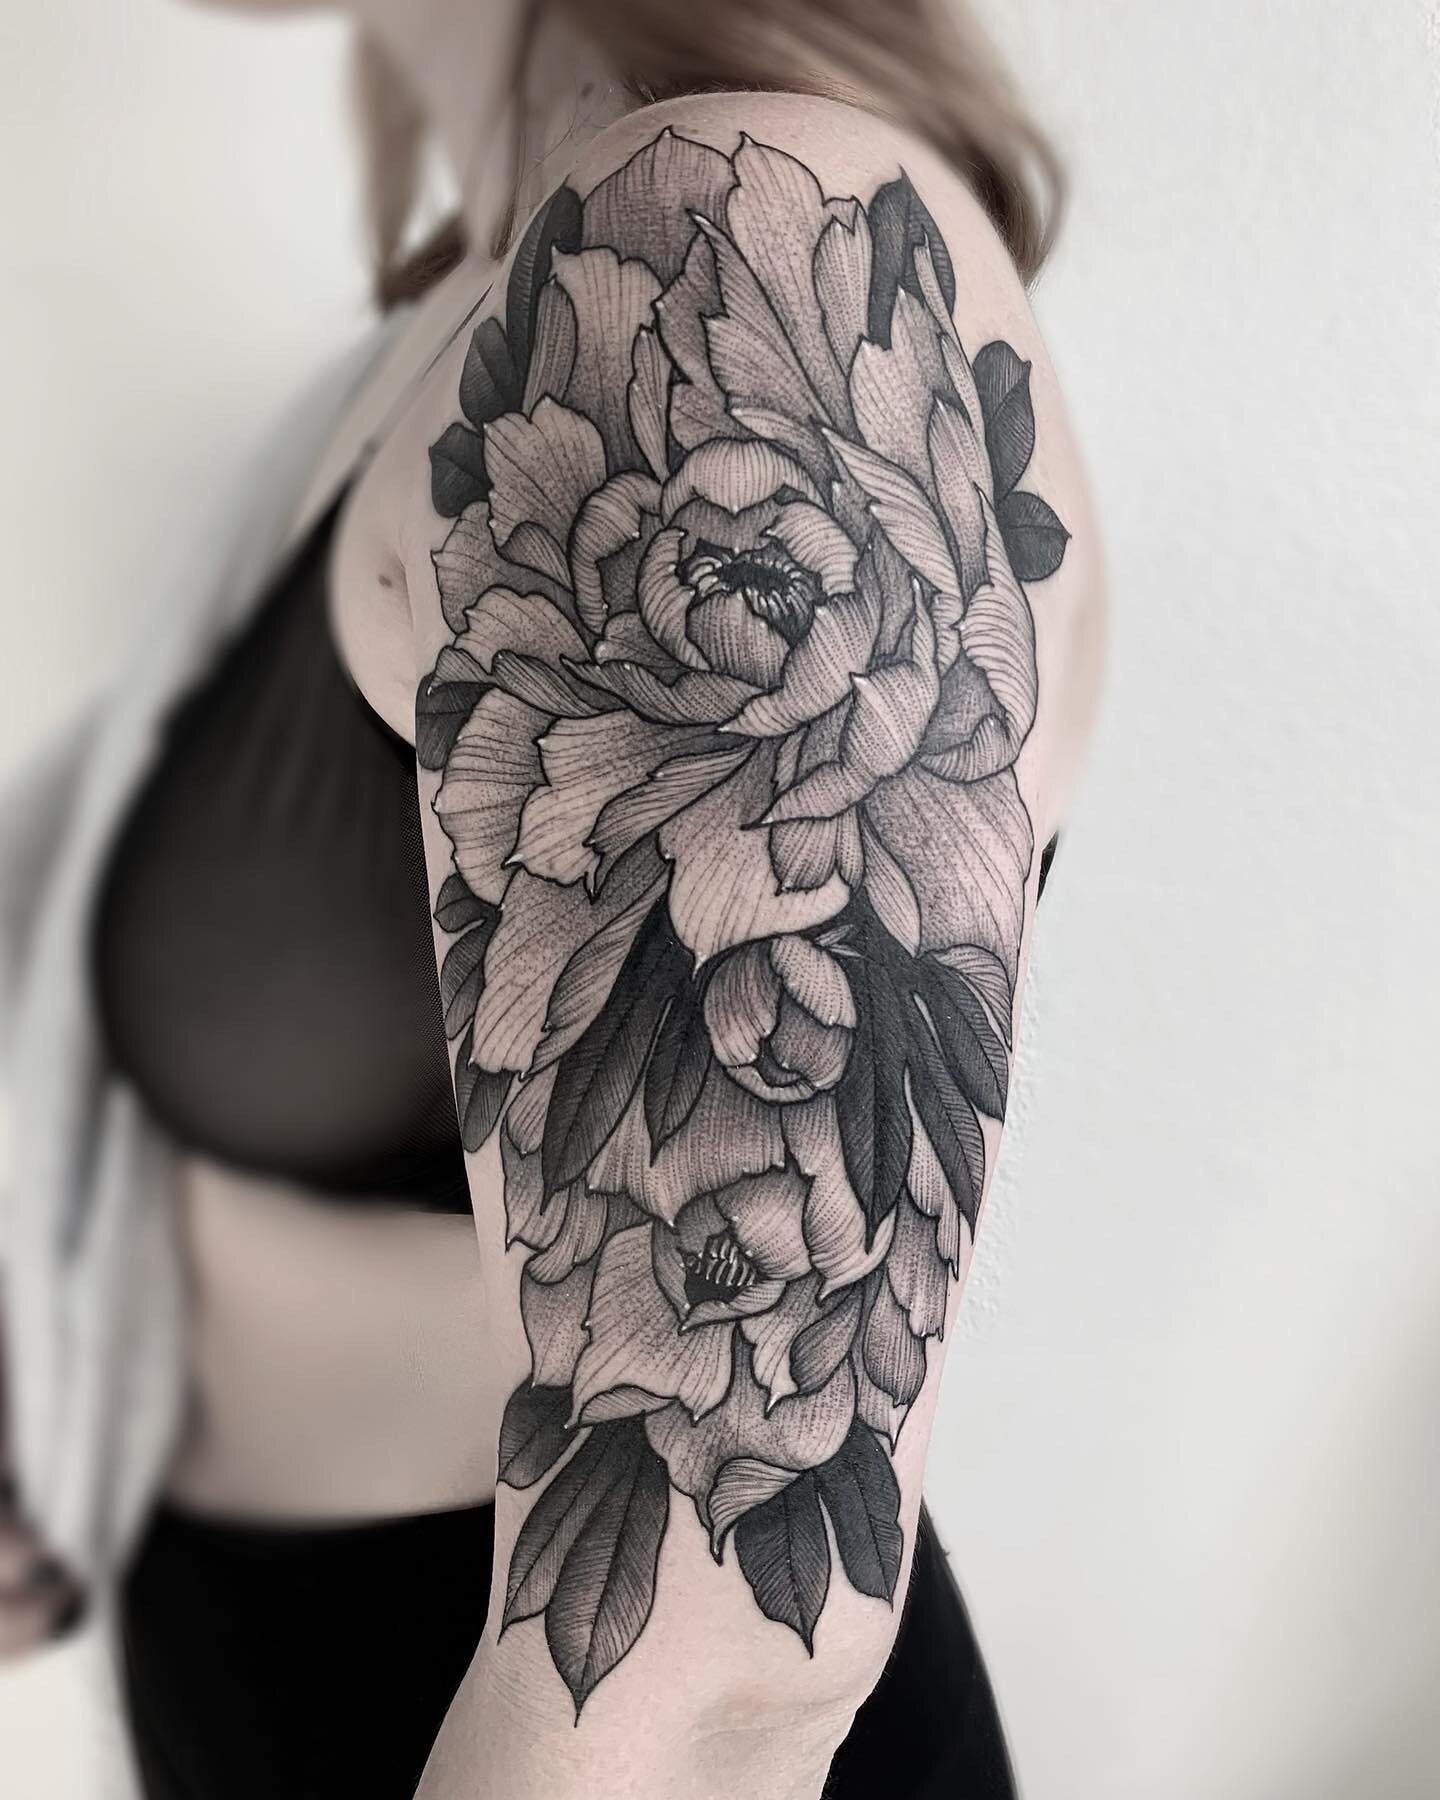 Happy October 🍂🎃 amazing peonies by @lucyannetattoos 
(Day 2 after taking off @electrumsupply dermor bandage)

&bull;
&bull;
&bull; 

@lucyannetattoos 
@industryinks 
@hivecaps 
@electrumsupply 
@bishoprotary 

&bull;
&bull;
&bull;

#tattoo #tattoo